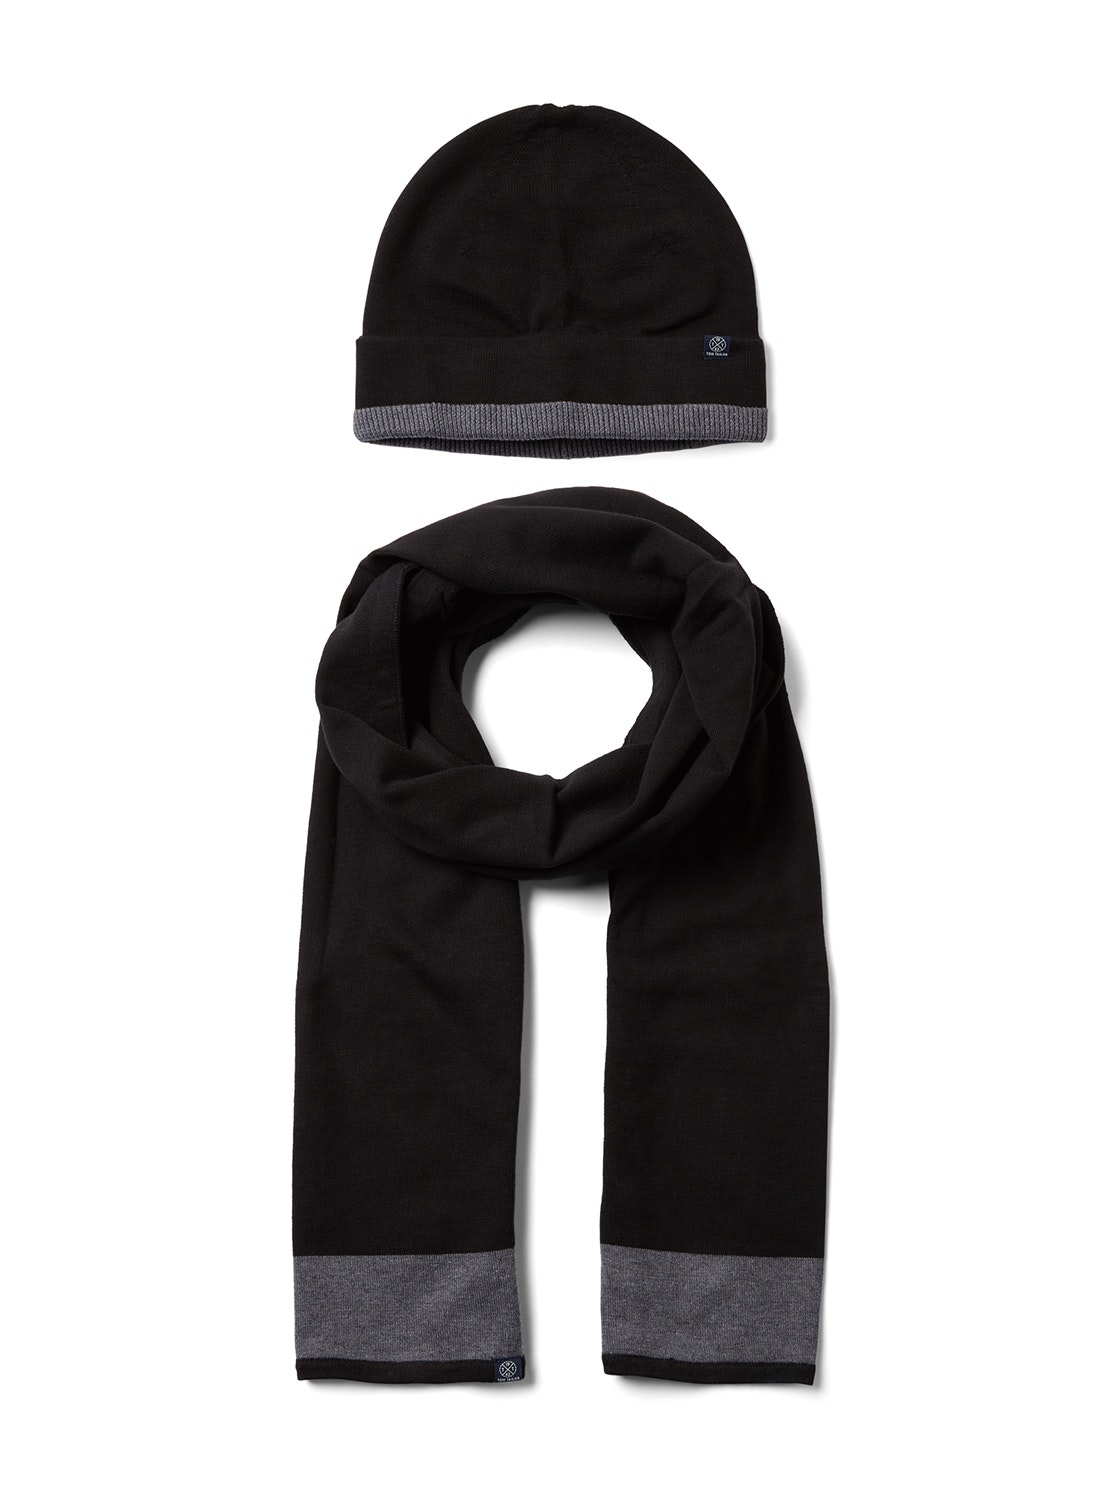 christmas set of scarf and hat, Black                         Grey,